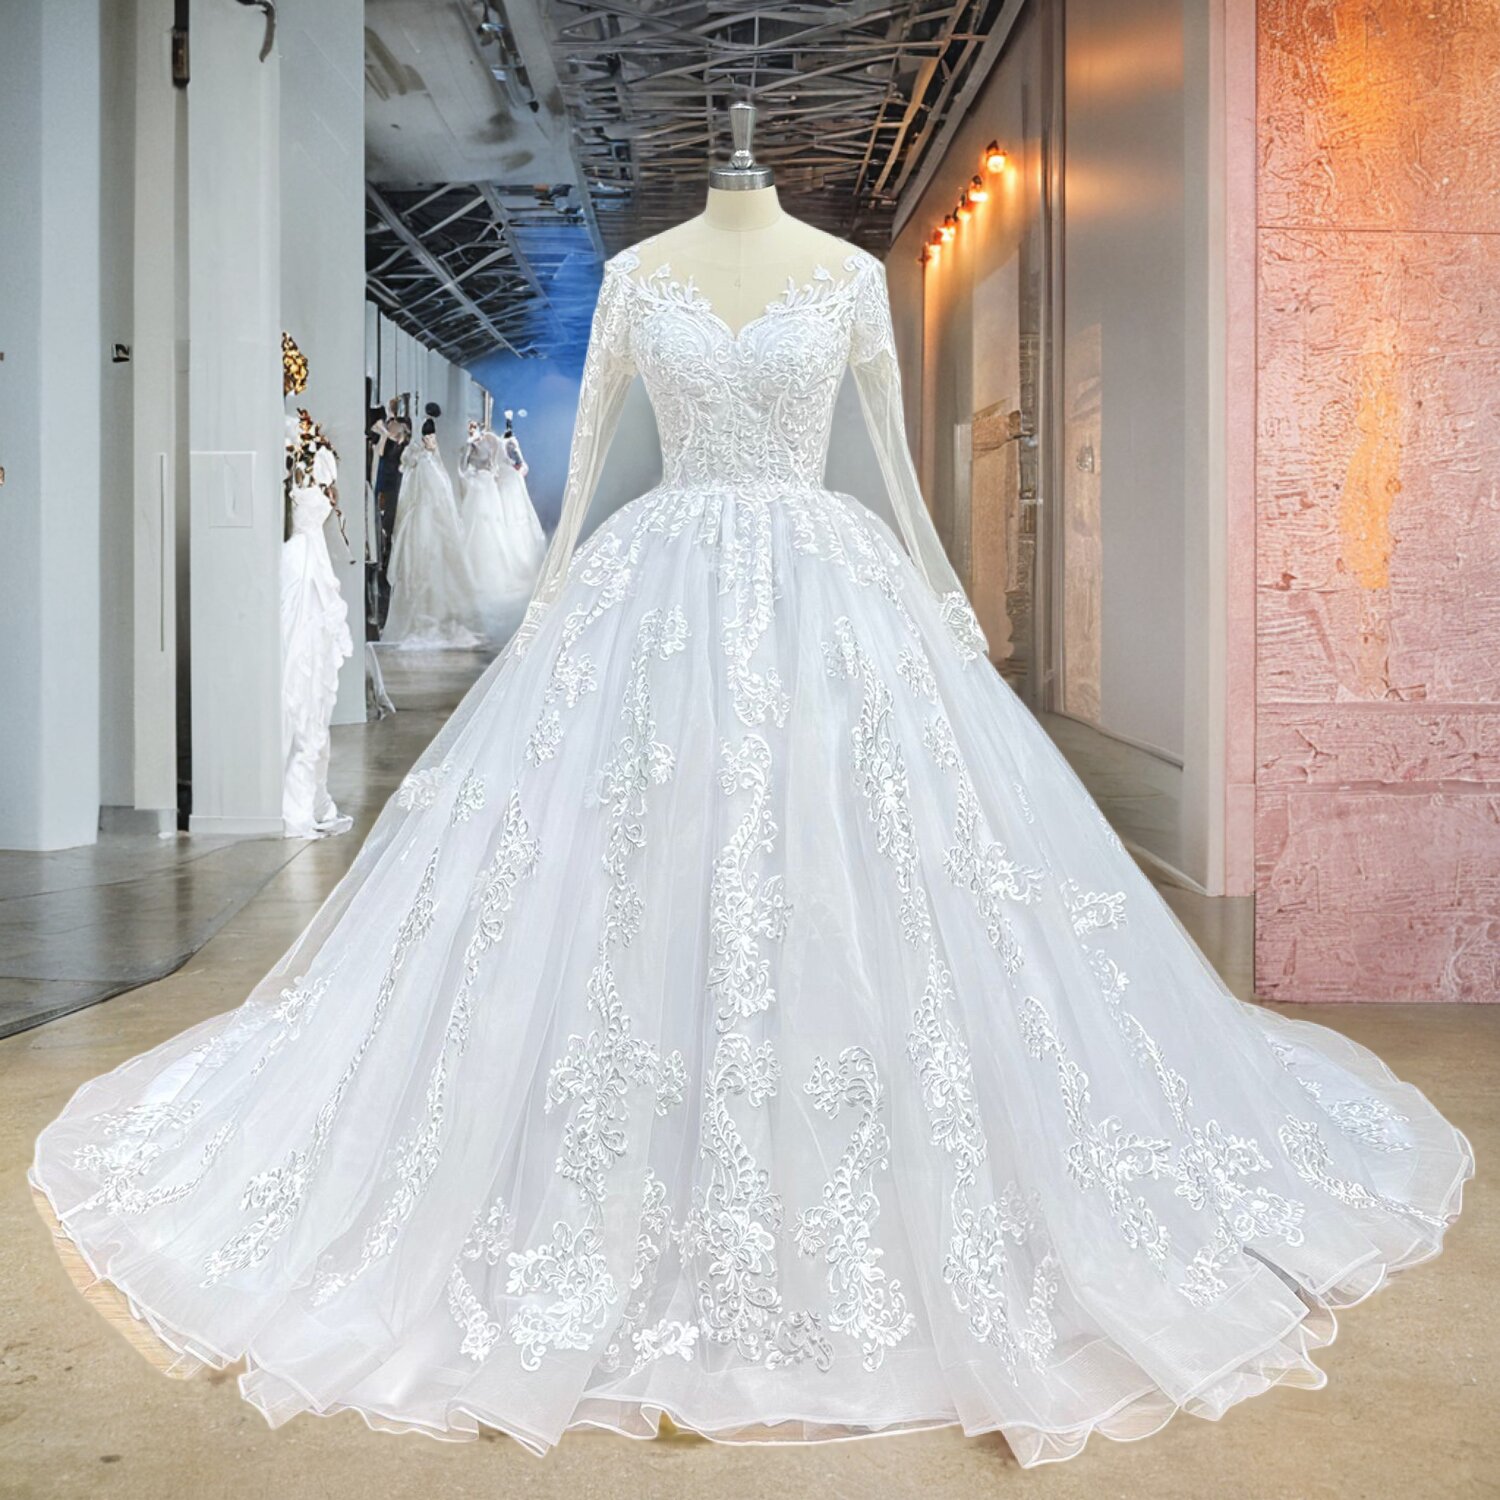 Hire Lnyer Scalloped Neck Buttons Up Back Long Sleeve Sequins Appliques Princess Ball Gown Wedding Dresses Real Office Photos Video